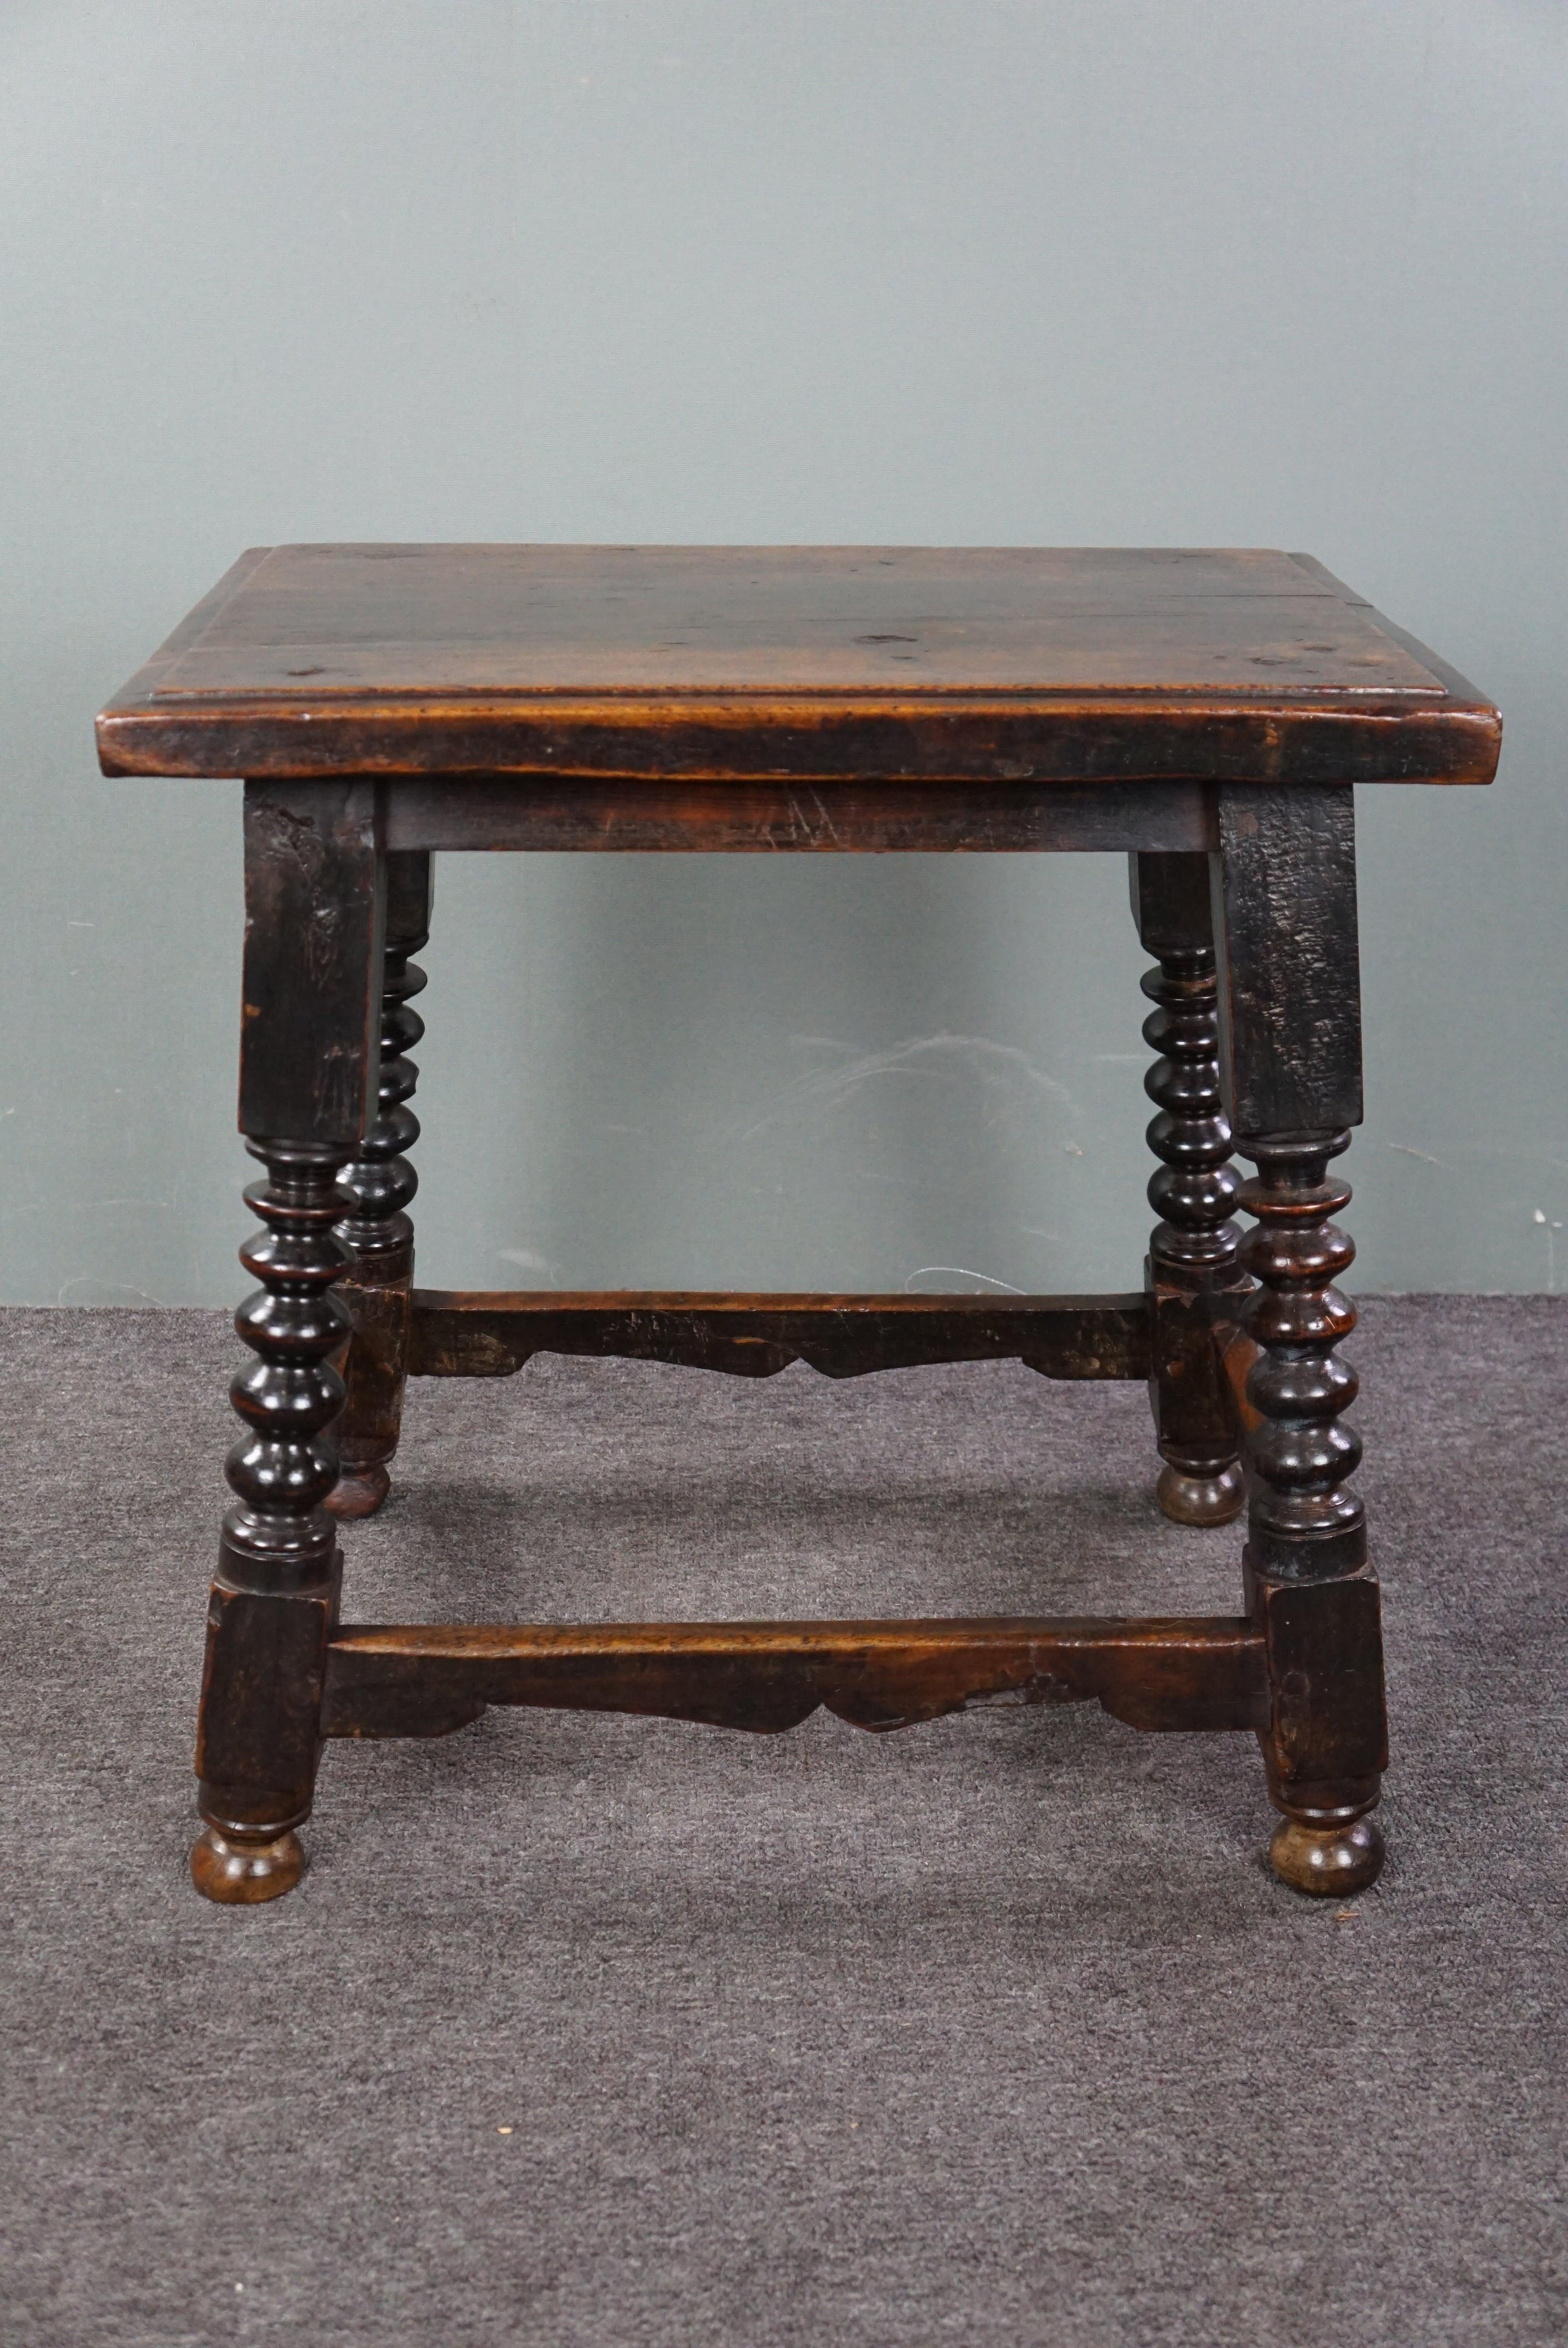 Offered is this beautiful and in very good condition, large Spanish joint stool from the 16th century with stunning twisted legs. This remarkable 16th-century gem has an impressively commanding presence; one cannot help but admire not only its age